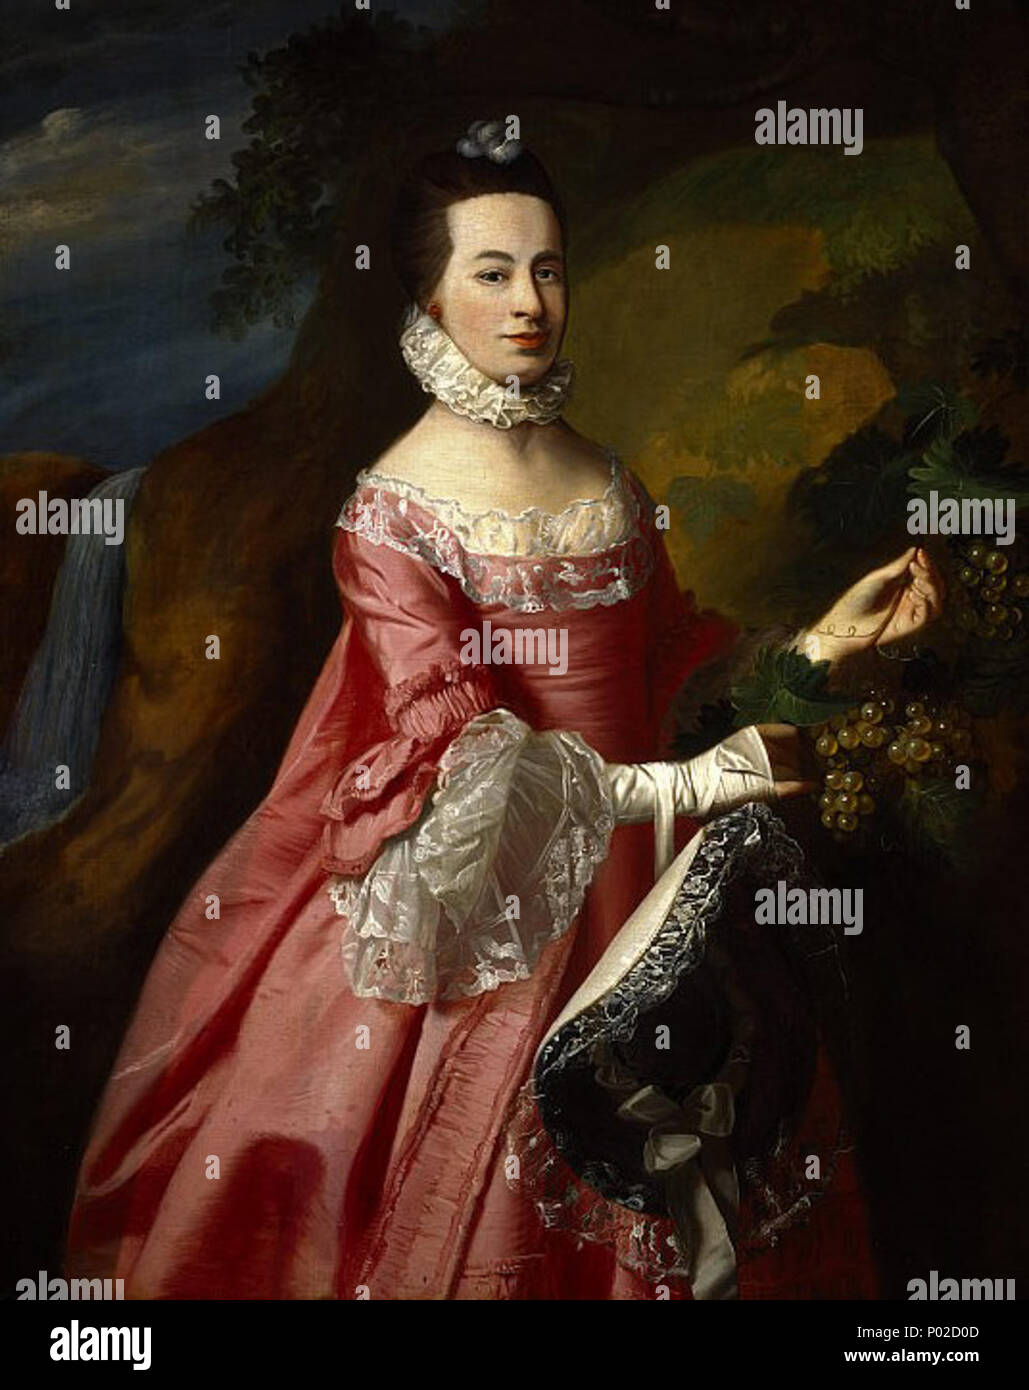 .  English: Portrait of Anne Erving, Mrs Duncan Stewart, 1740 - after 1802, daughter of the Hon. John Erving, a Scot born in Kirkwall in the Orkneys who had emigrated to America in 1706. Erving, as governor of Boston and one of His Majesty's Council for the Province, was a prominent citizen in colonial North America. The portrait was probably painted in Boston to mark the occasion of Anne's marriage to Duncan Stewart of Ardsheal in January 1767. A family story relates how, during the American War of Independence, Anne stole the keys of the city prison from under her father's pillow so that her Stock Photo